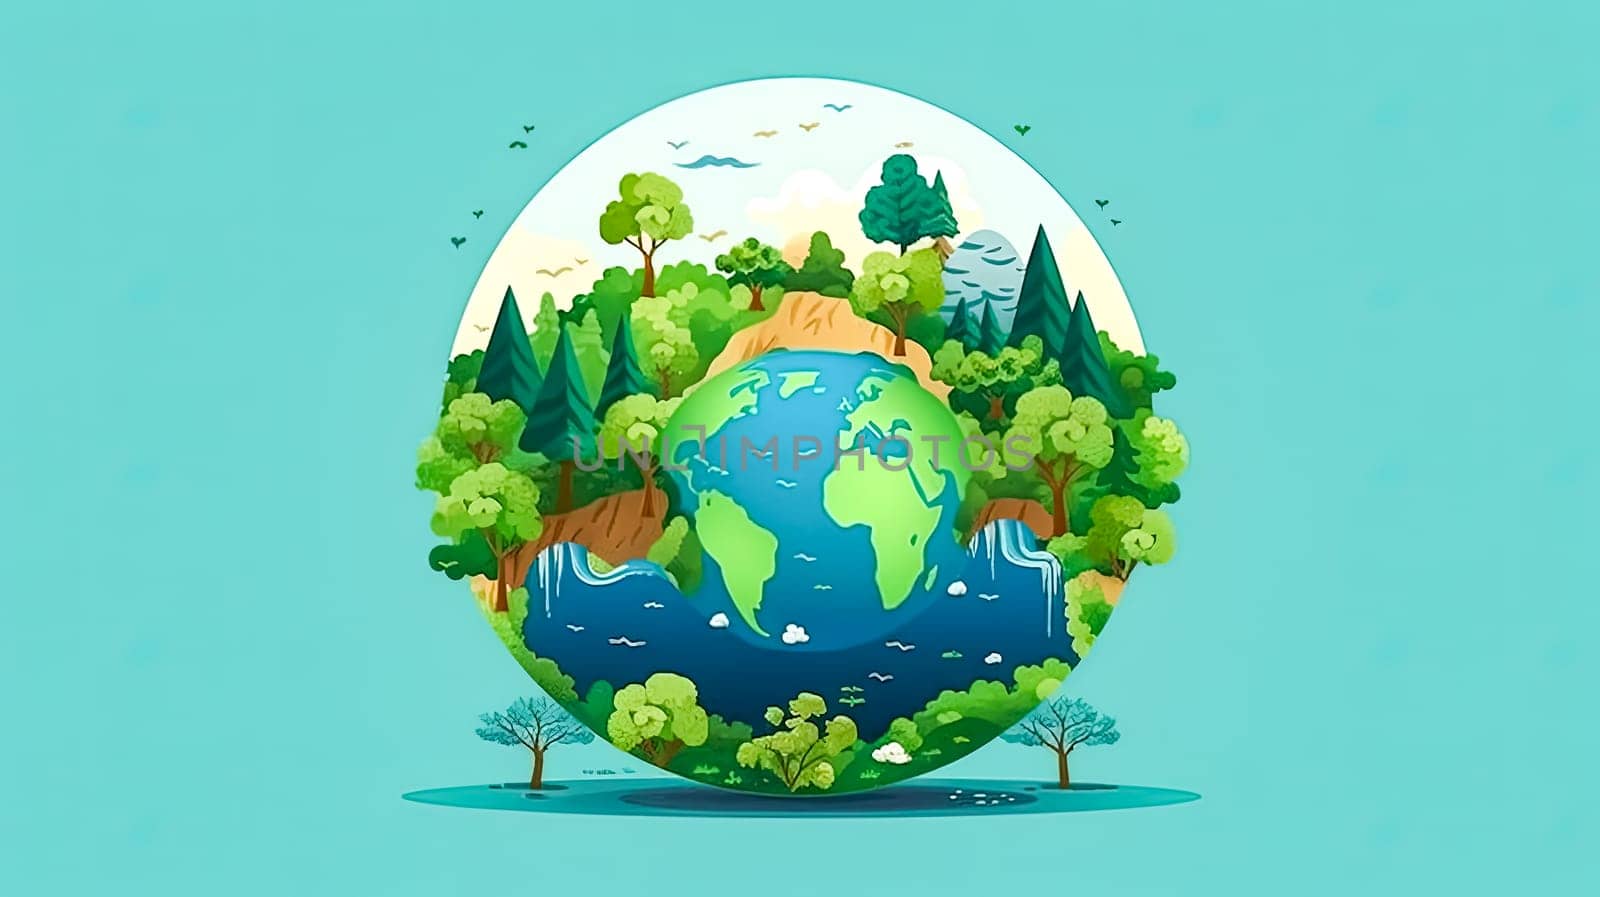 A planet in bloom, Earth adorned with green landscapes and lush trees a festive salute to the conservation efforts embraced on Earth Day